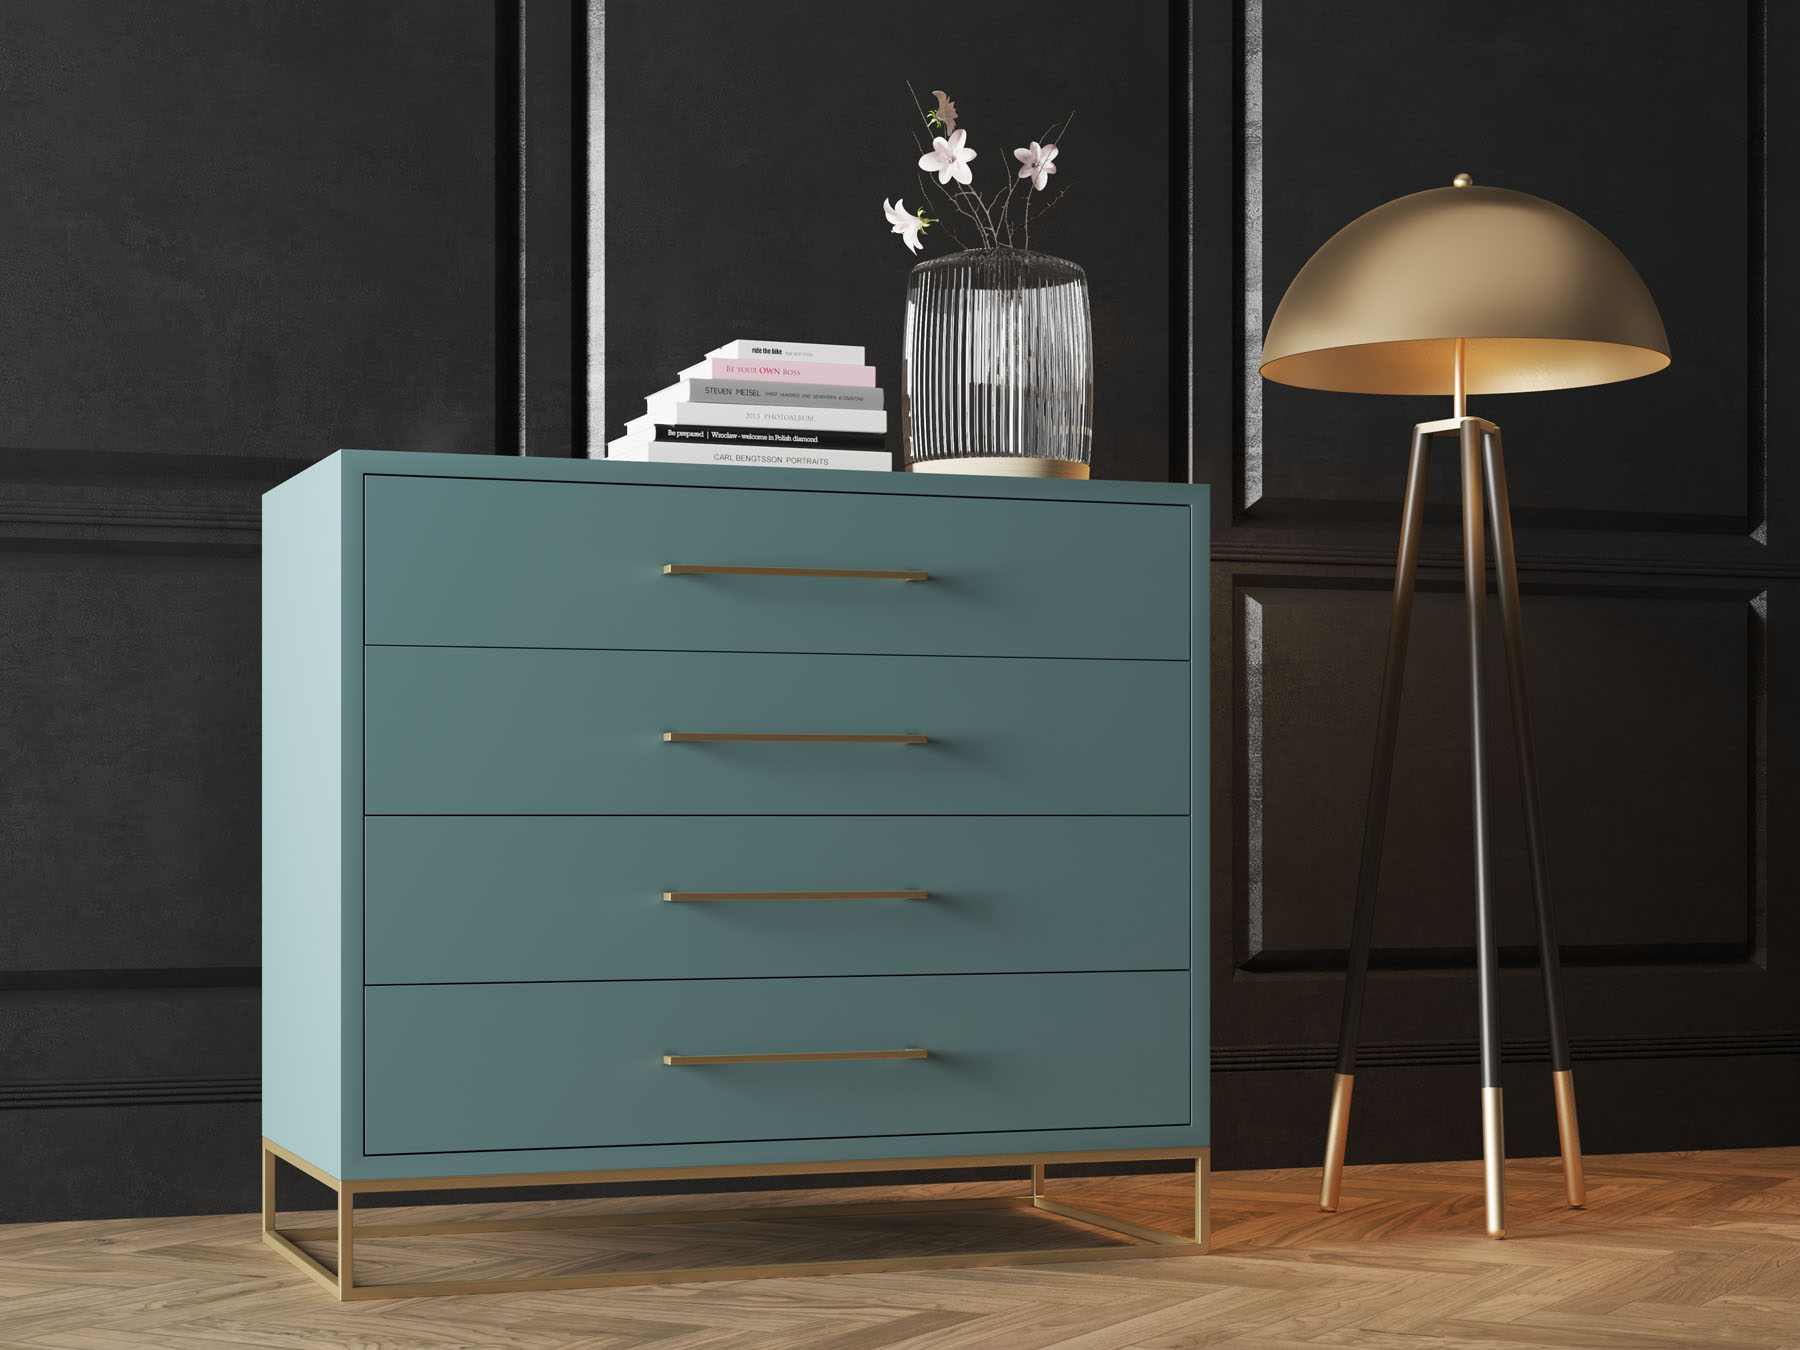 4 drawer server lilo satin turquoise with steel gold legs and handles, locally made in Johannesburg South Africa